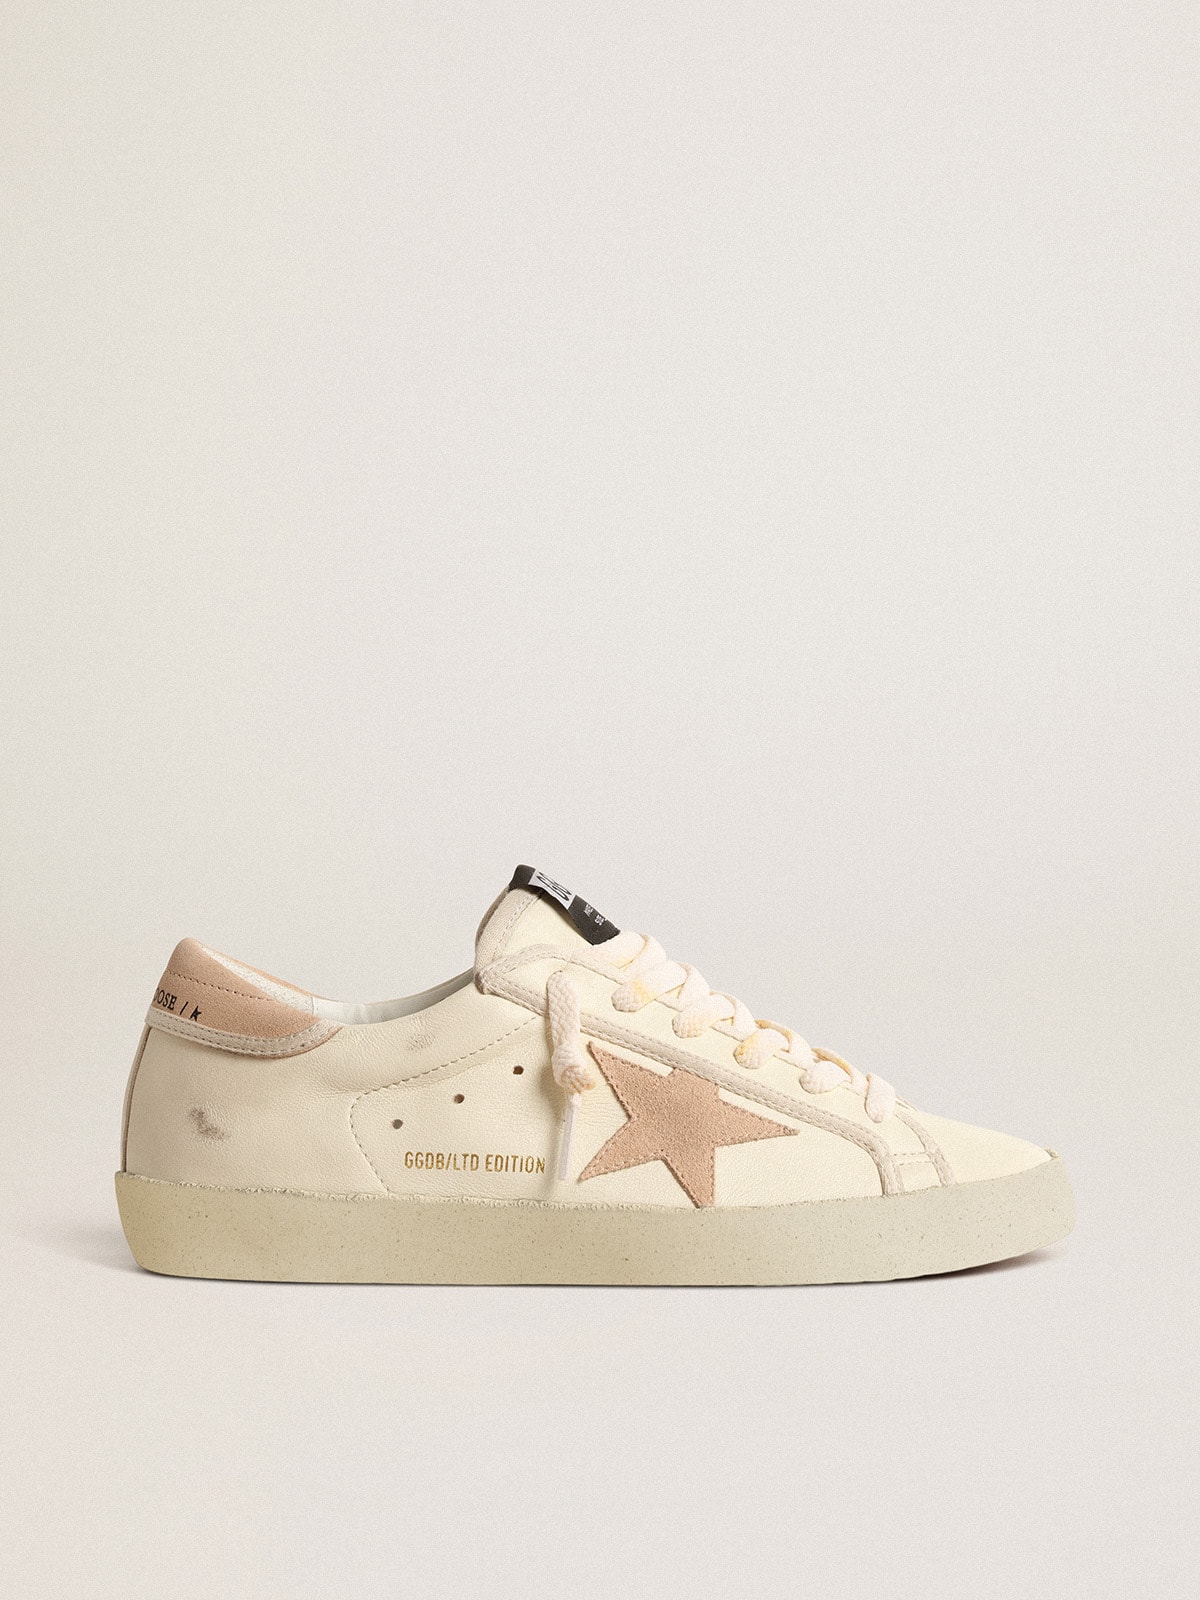 Women’s Super-Star LTD in nappa with suede star and heel tab | Golden Goose